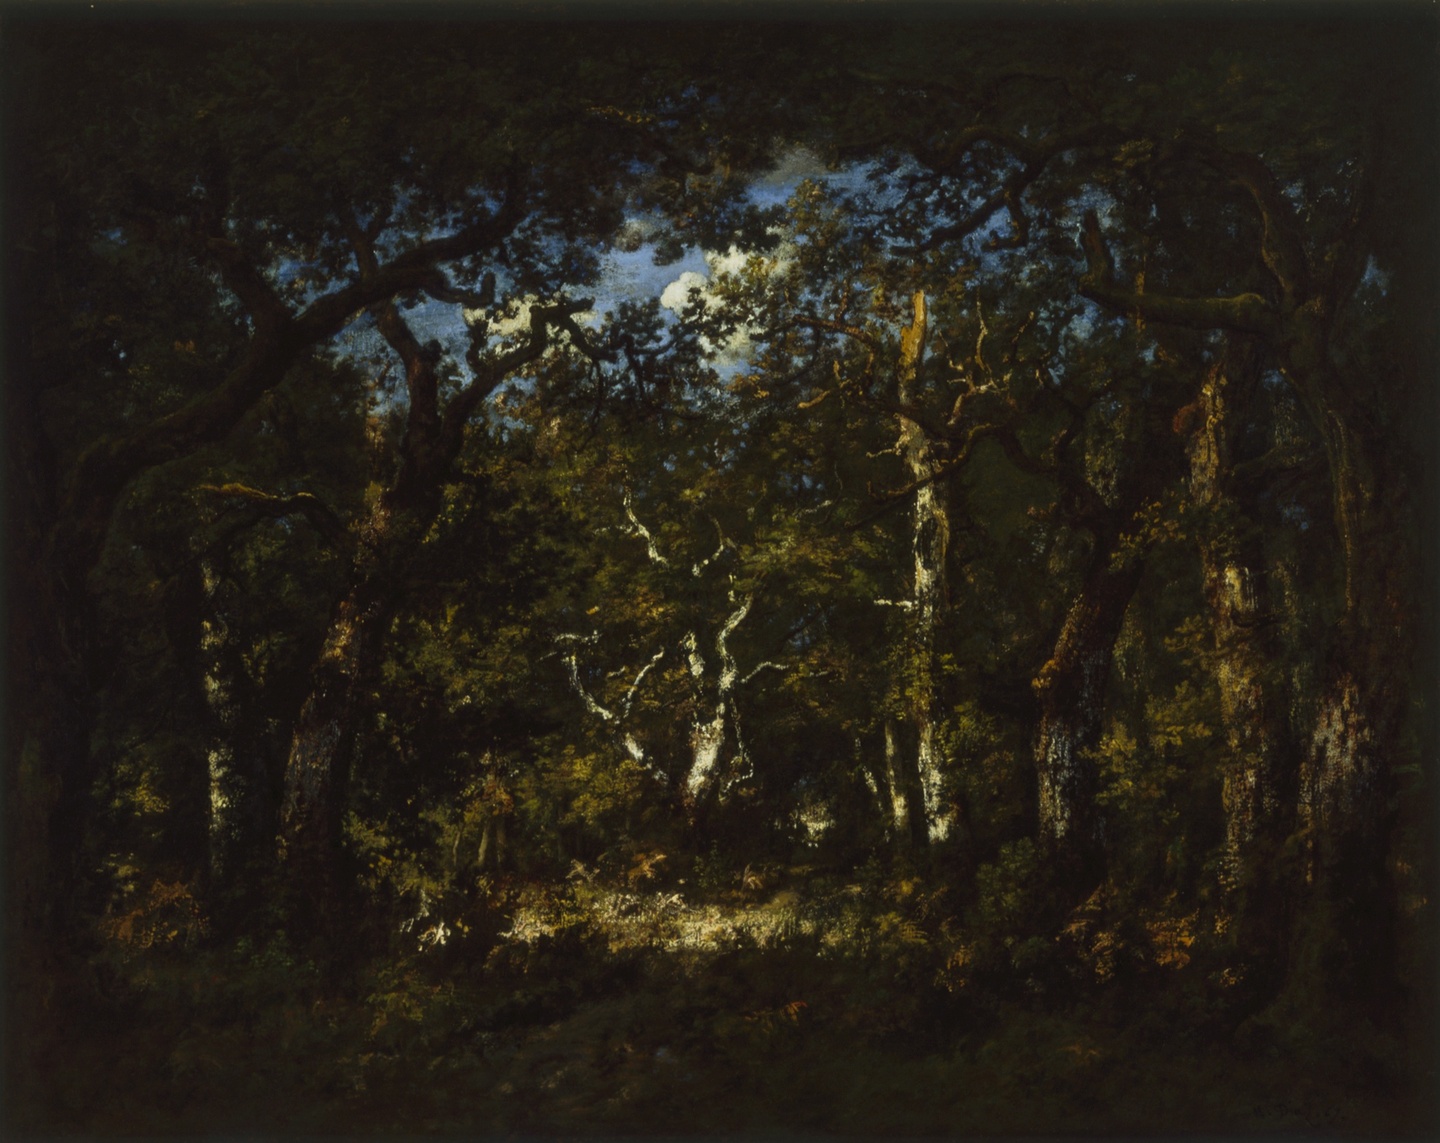 A bright clearing with trees, surrounded by a dark forest